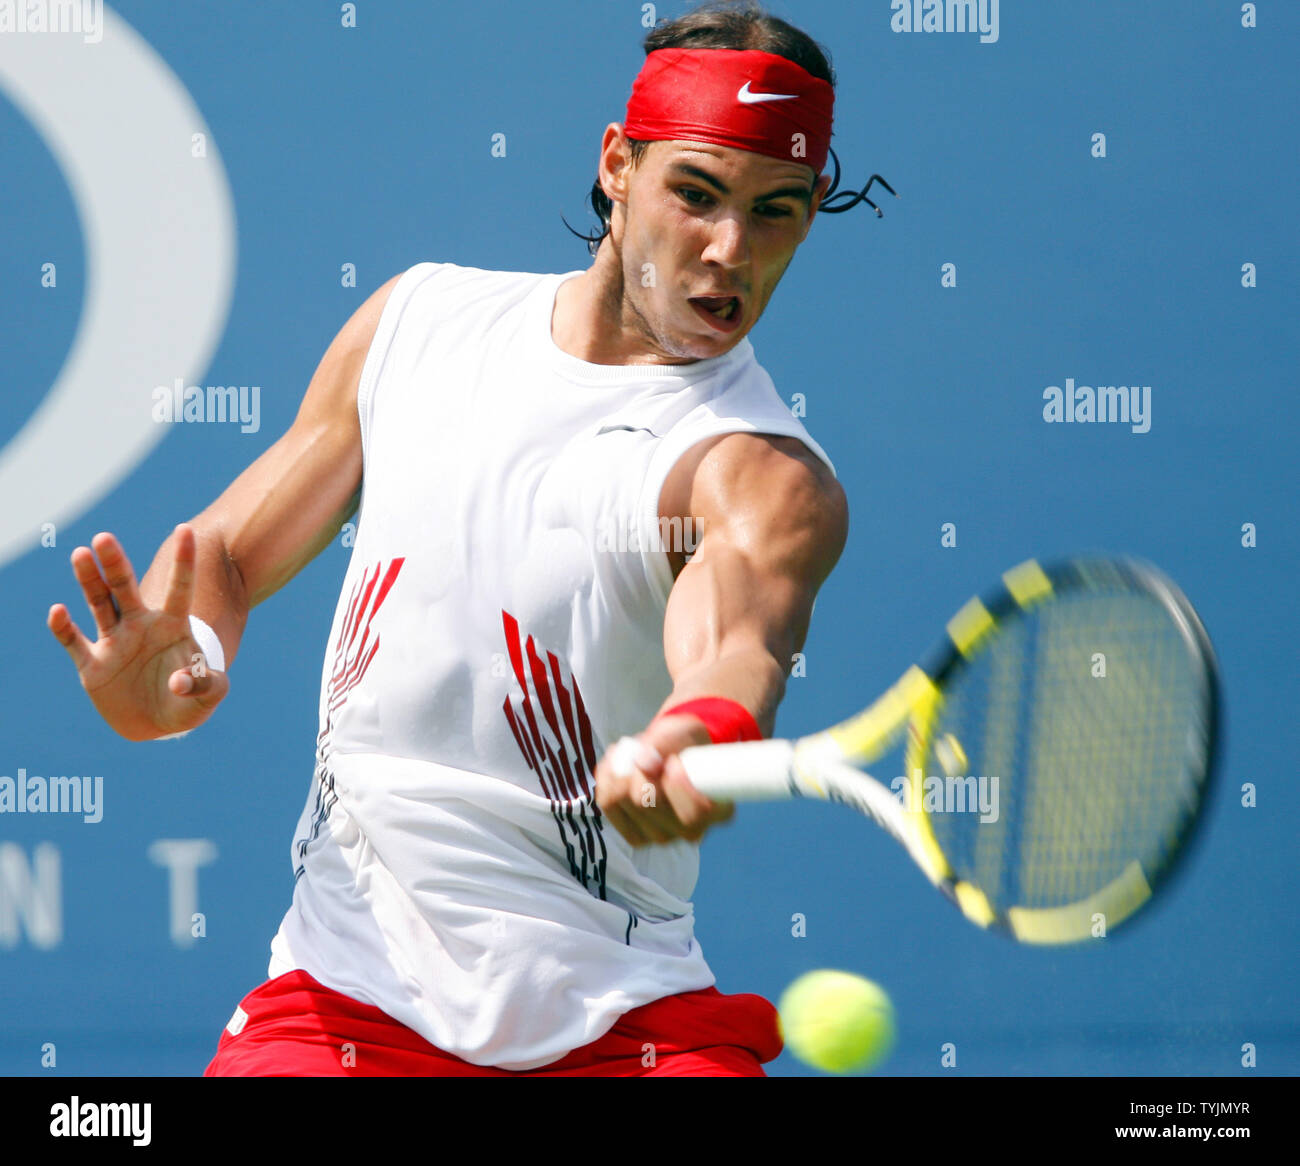 Rafael Nadal hits a forehand in his match against Viktor Troicki on day six  at the U.S. Open Tennis Championships at the U.S. National Tennis Center in  Flushing Meadows, New York on